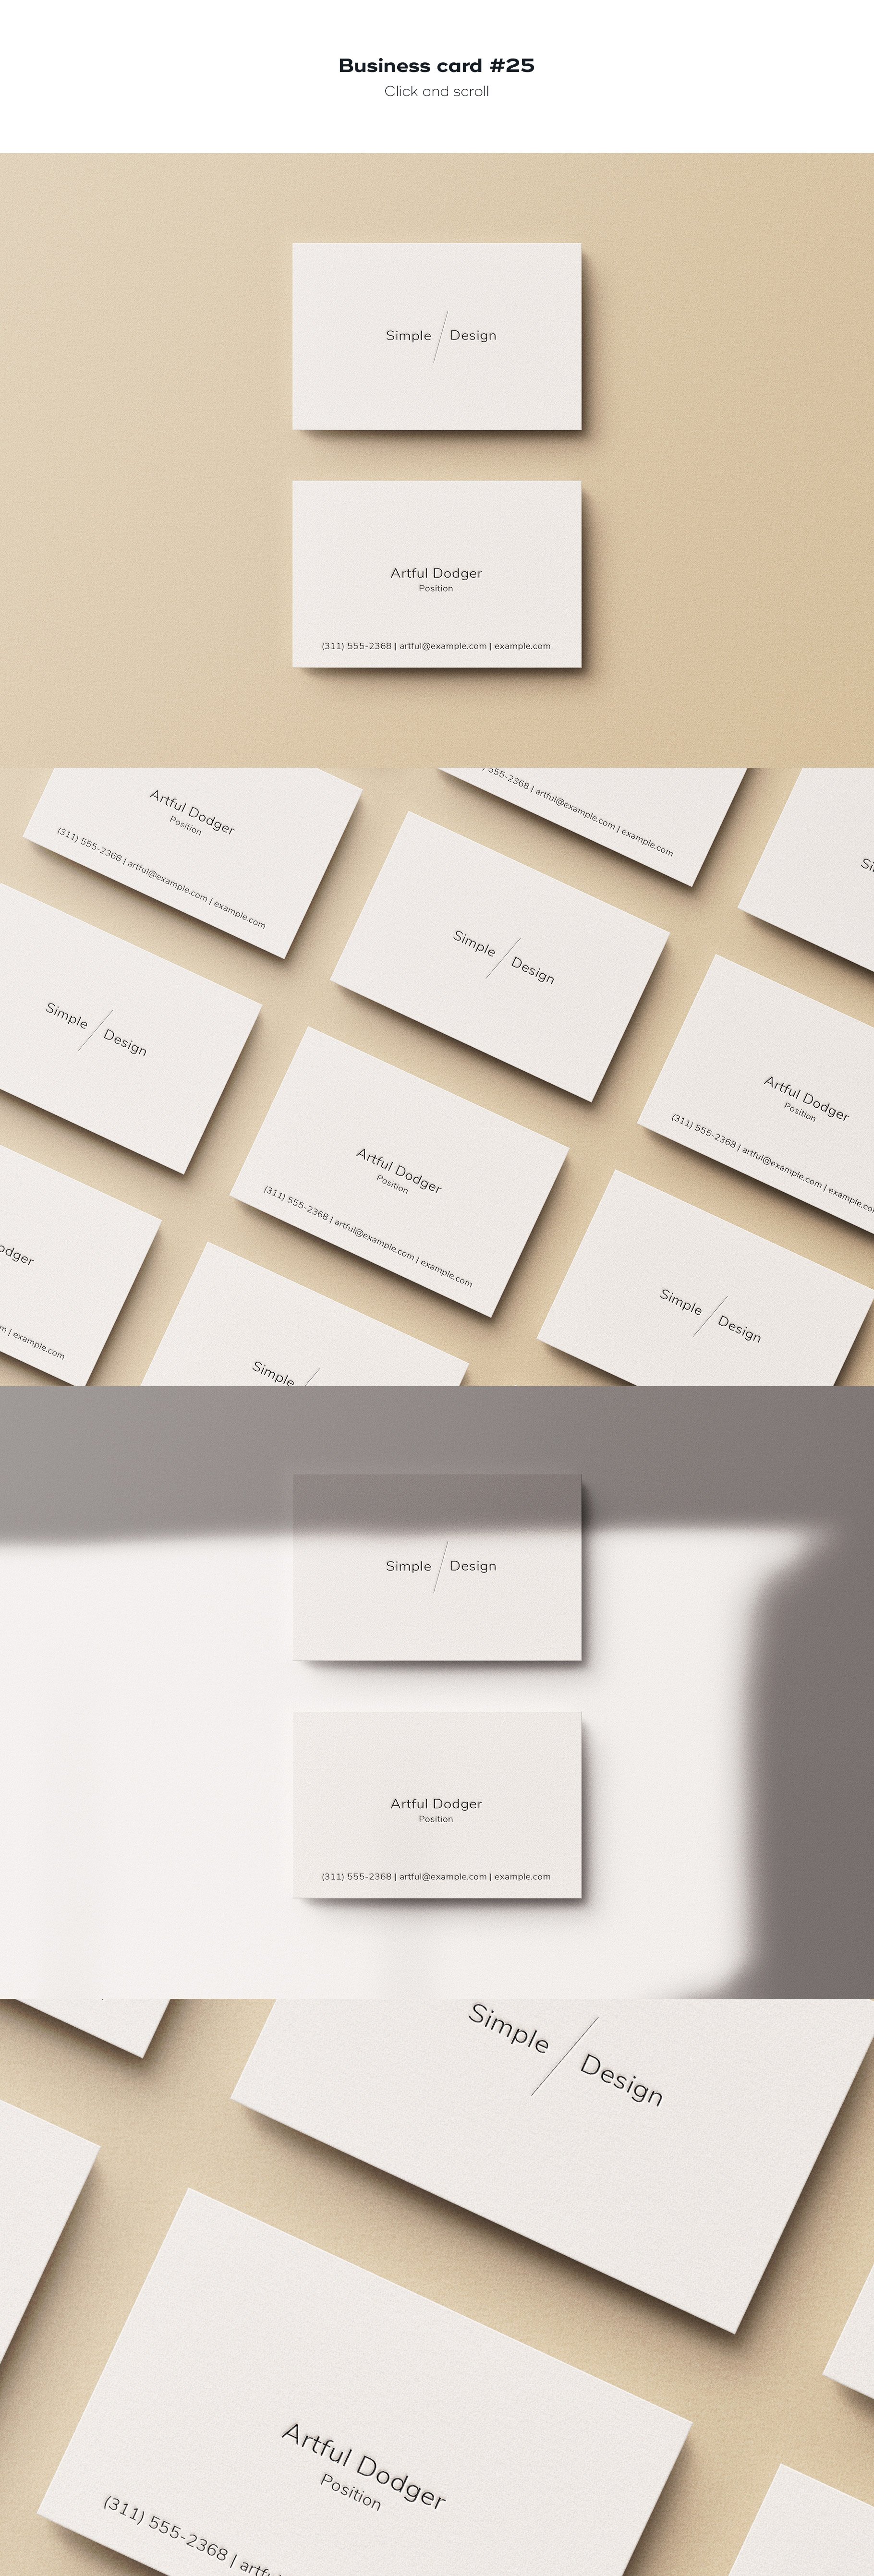 business card 25 22